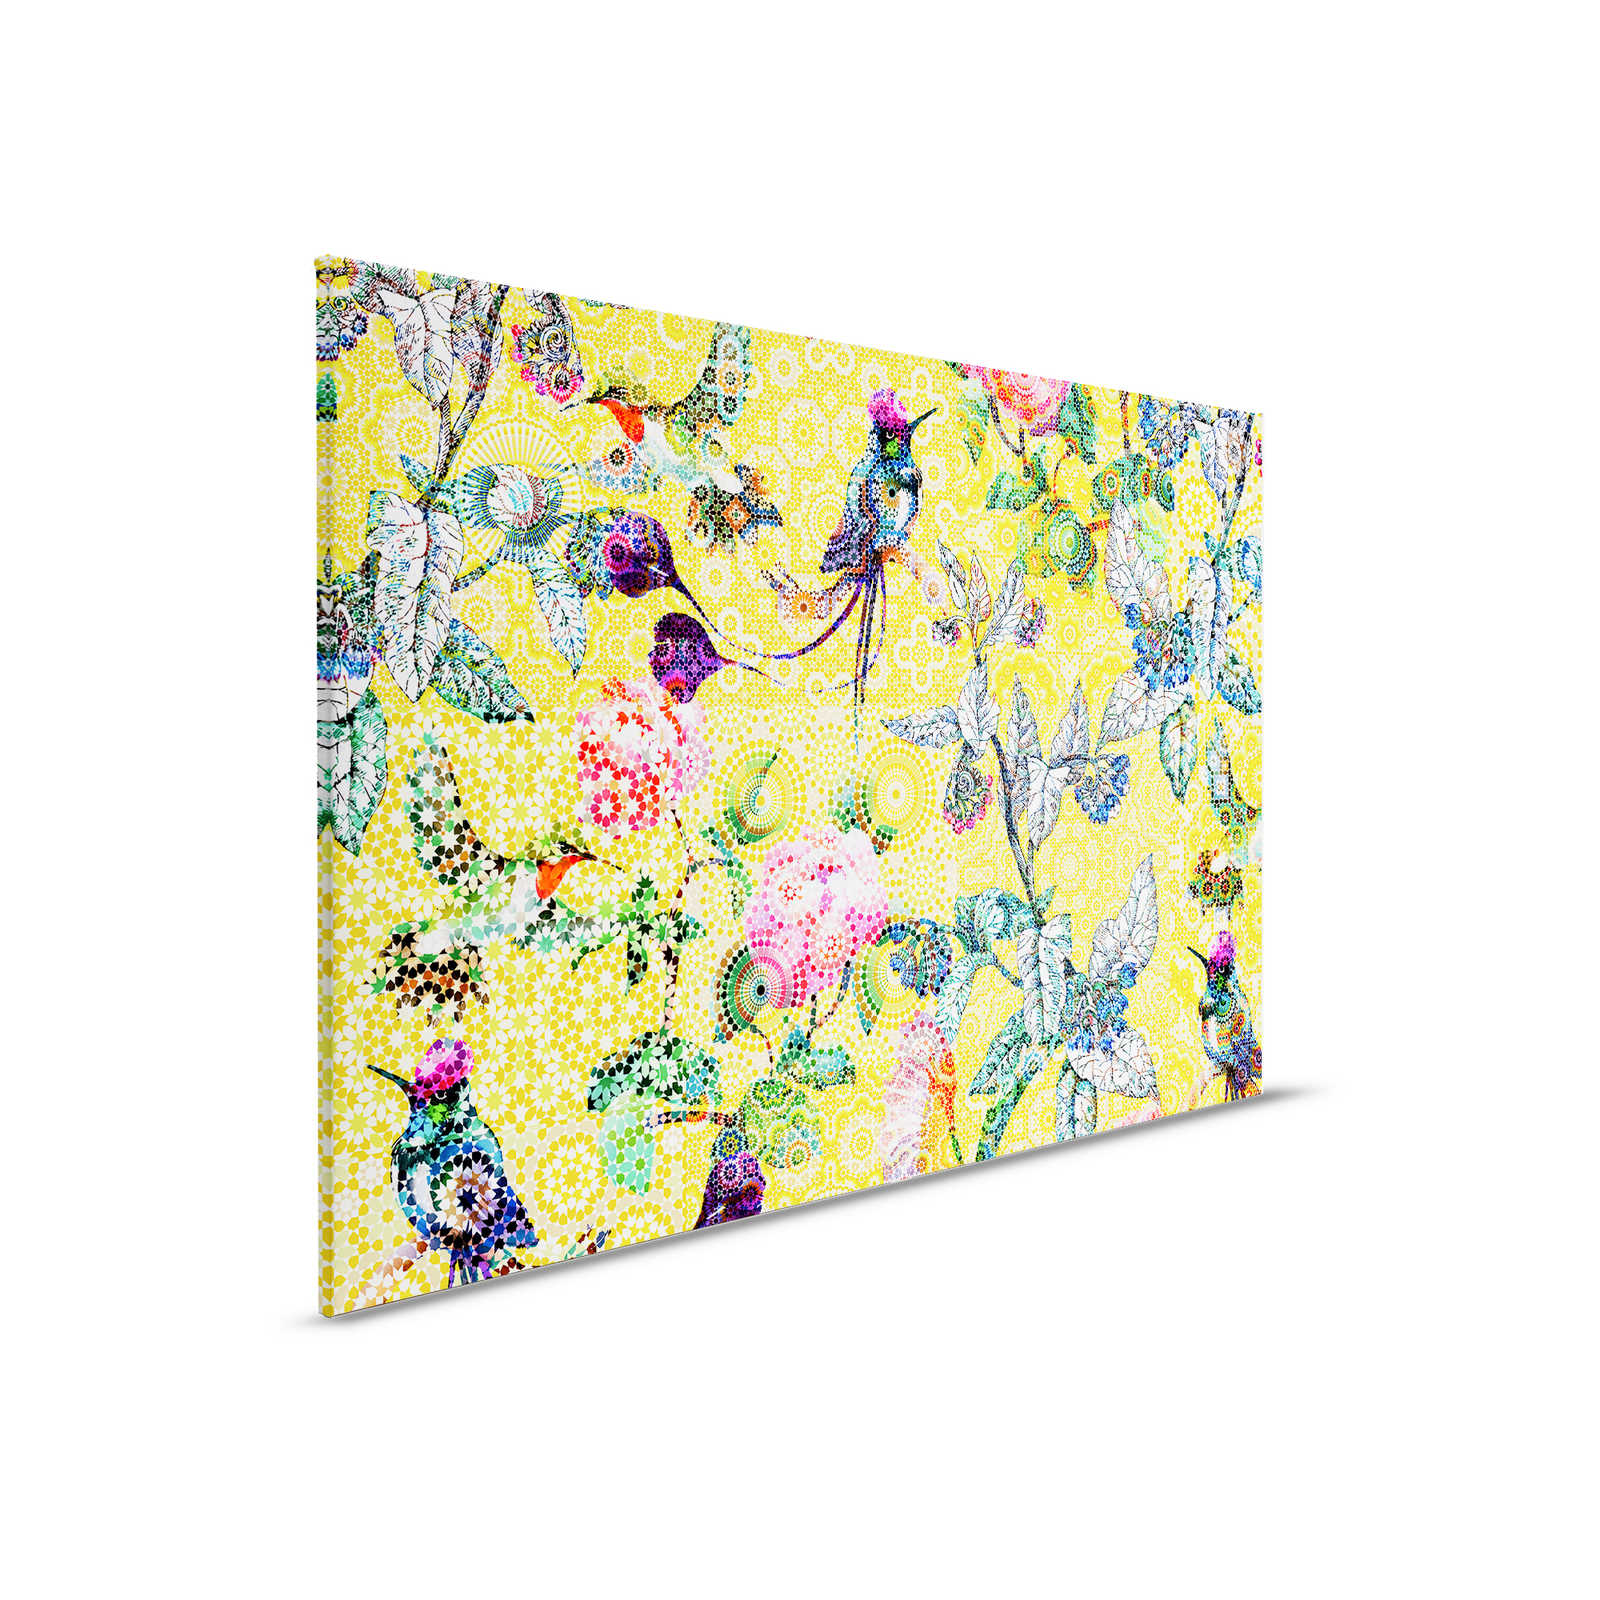         Canvas painting exotic flowers mosaic - 0,90 m x 0,60 m
    